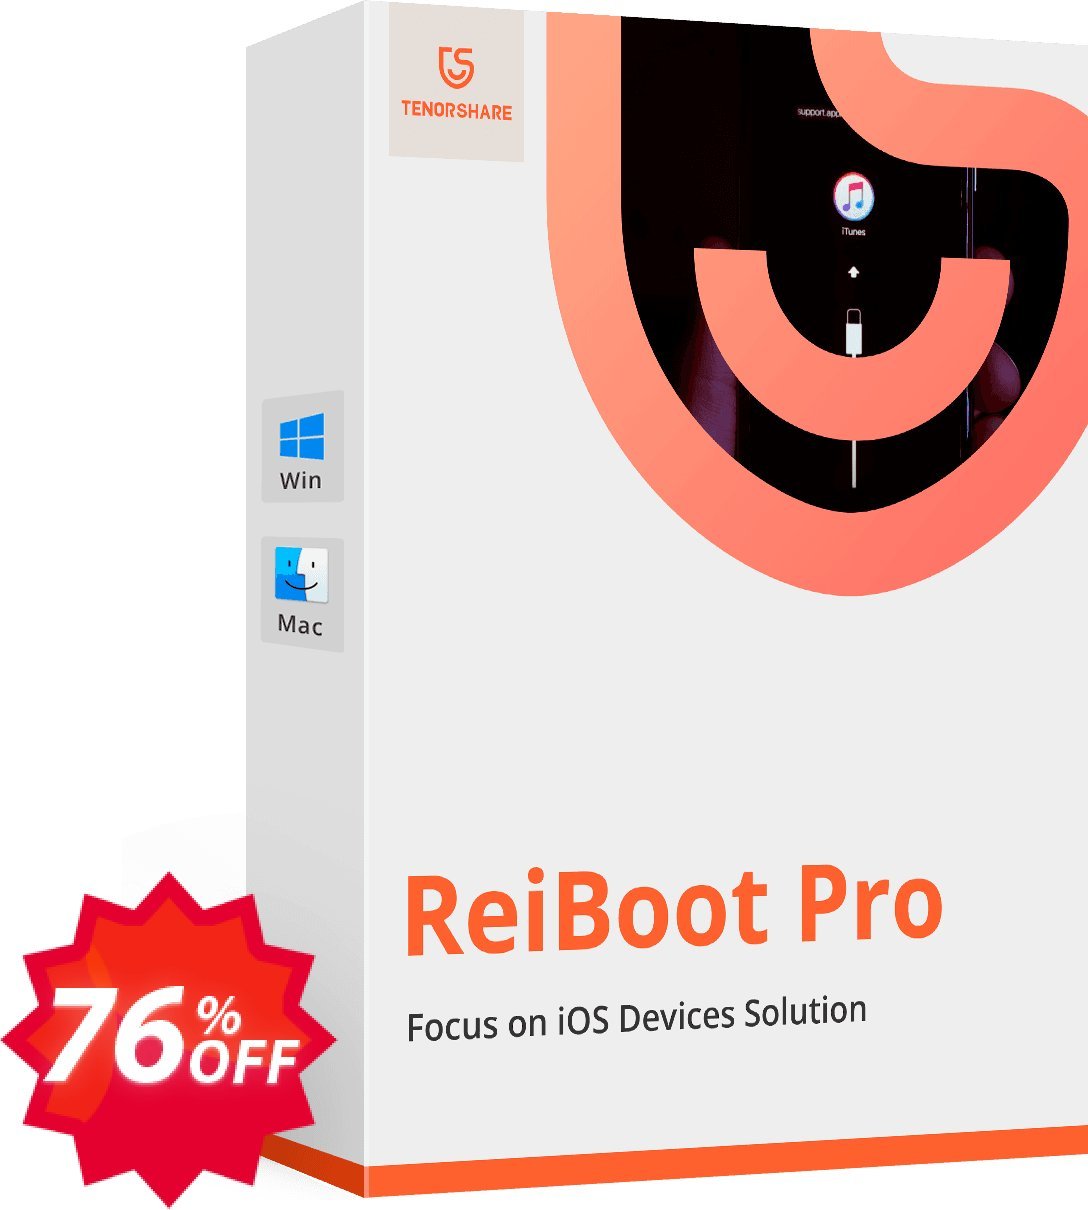 Tenorshare ReiBoot Pro, Yearly Plan  Coupon code 76% discount 